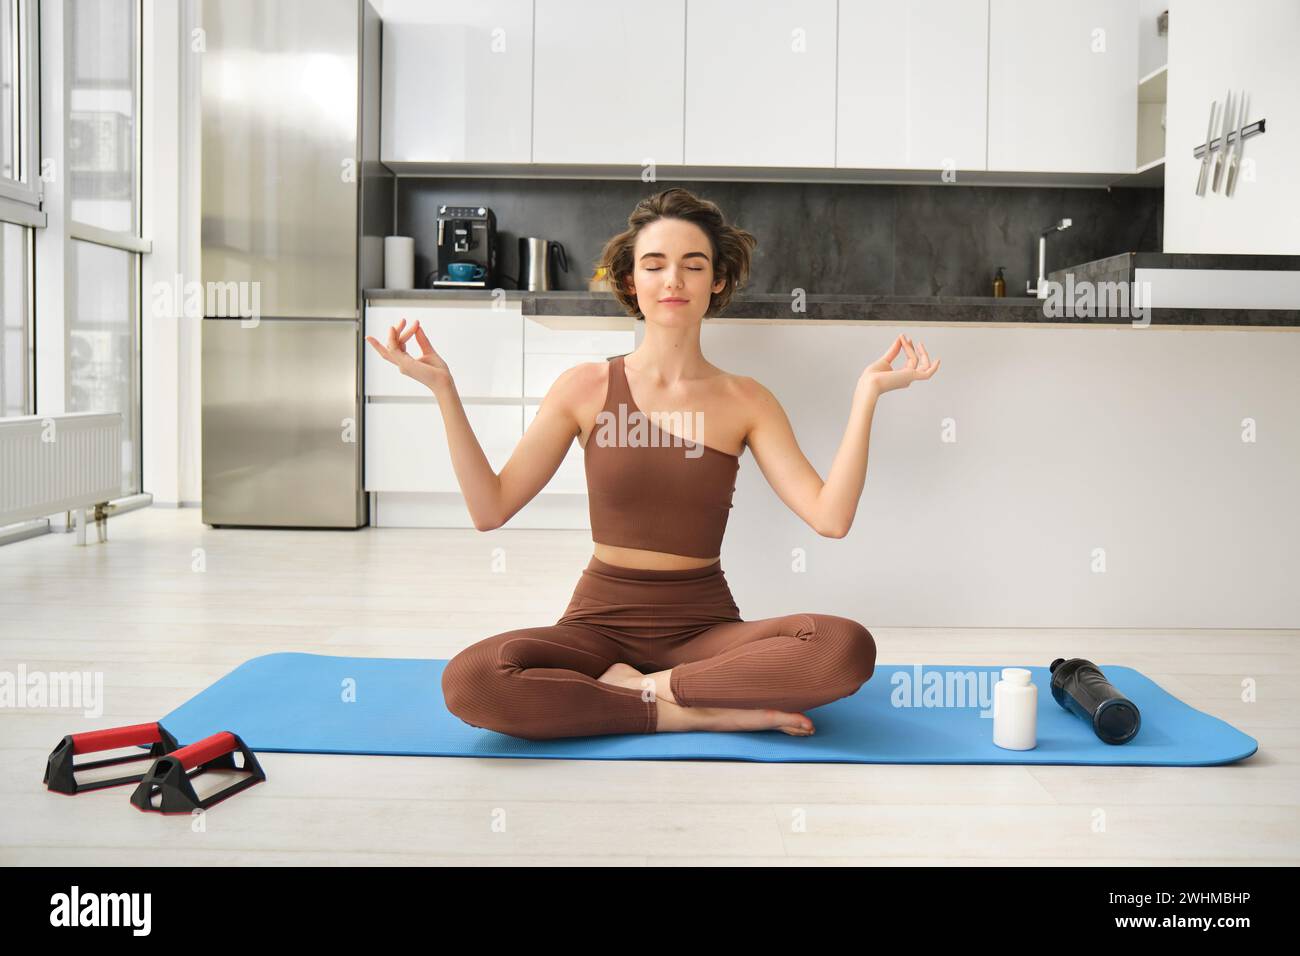 Image of young sport woman sitting at home on yoga mat, doing